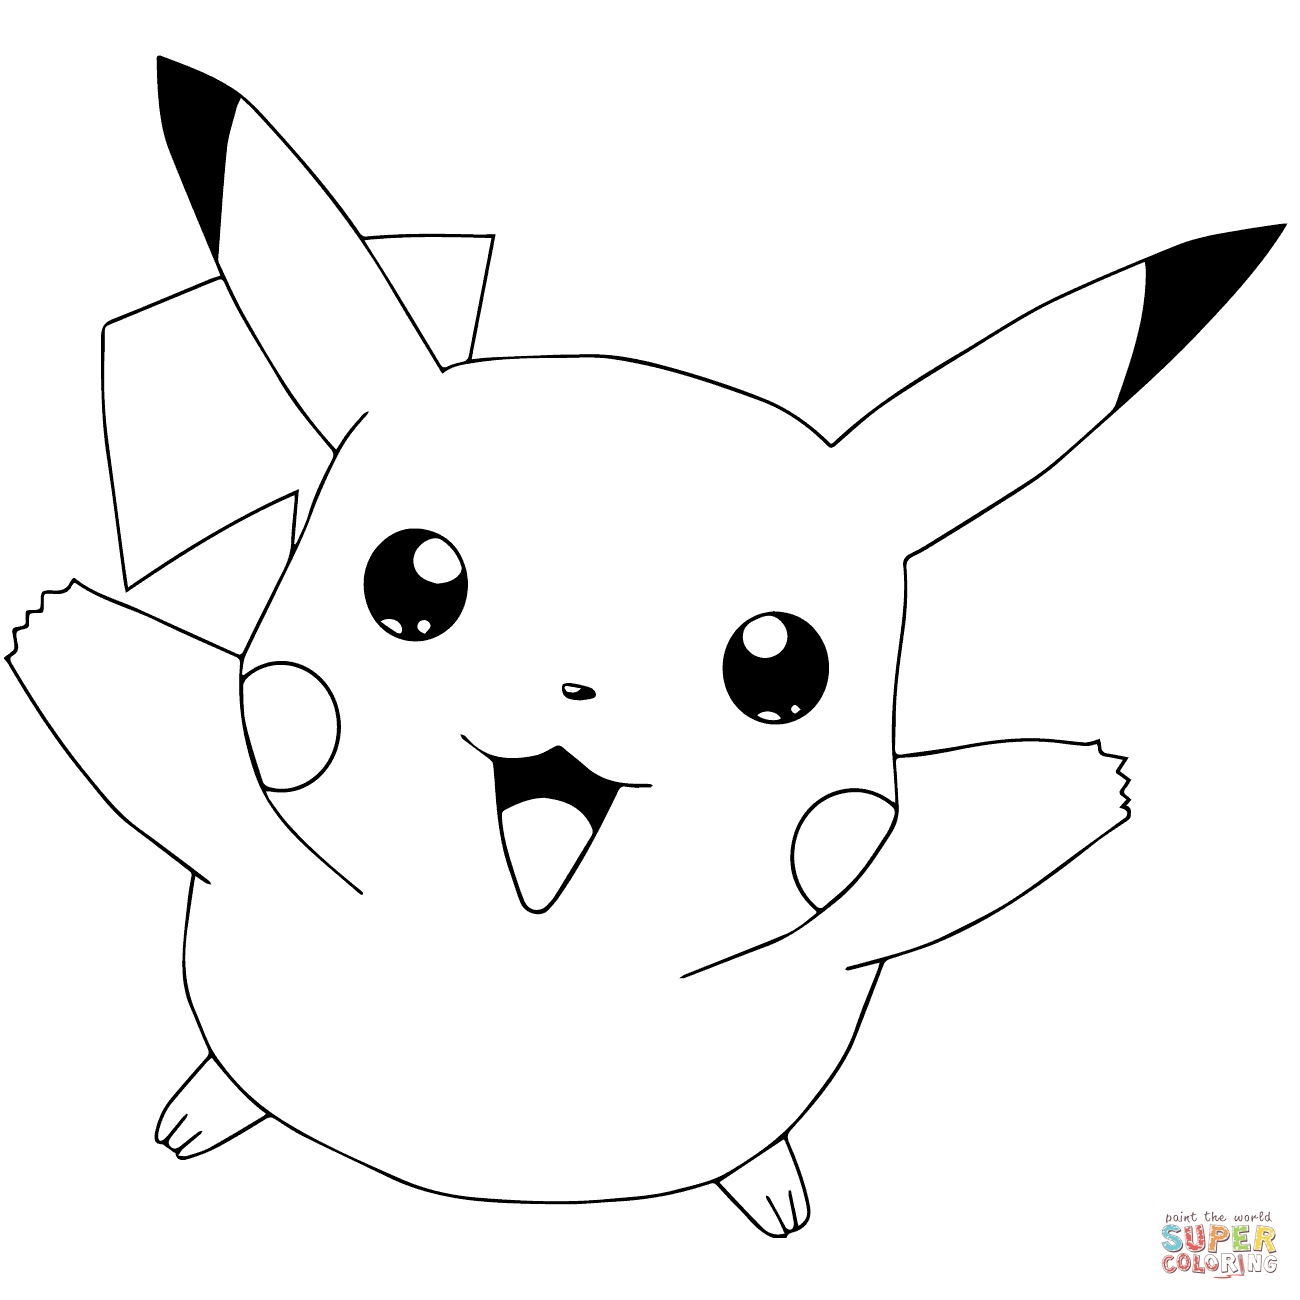 Pikachu clipart outlines, Pikachu outlines Transparent FREE for